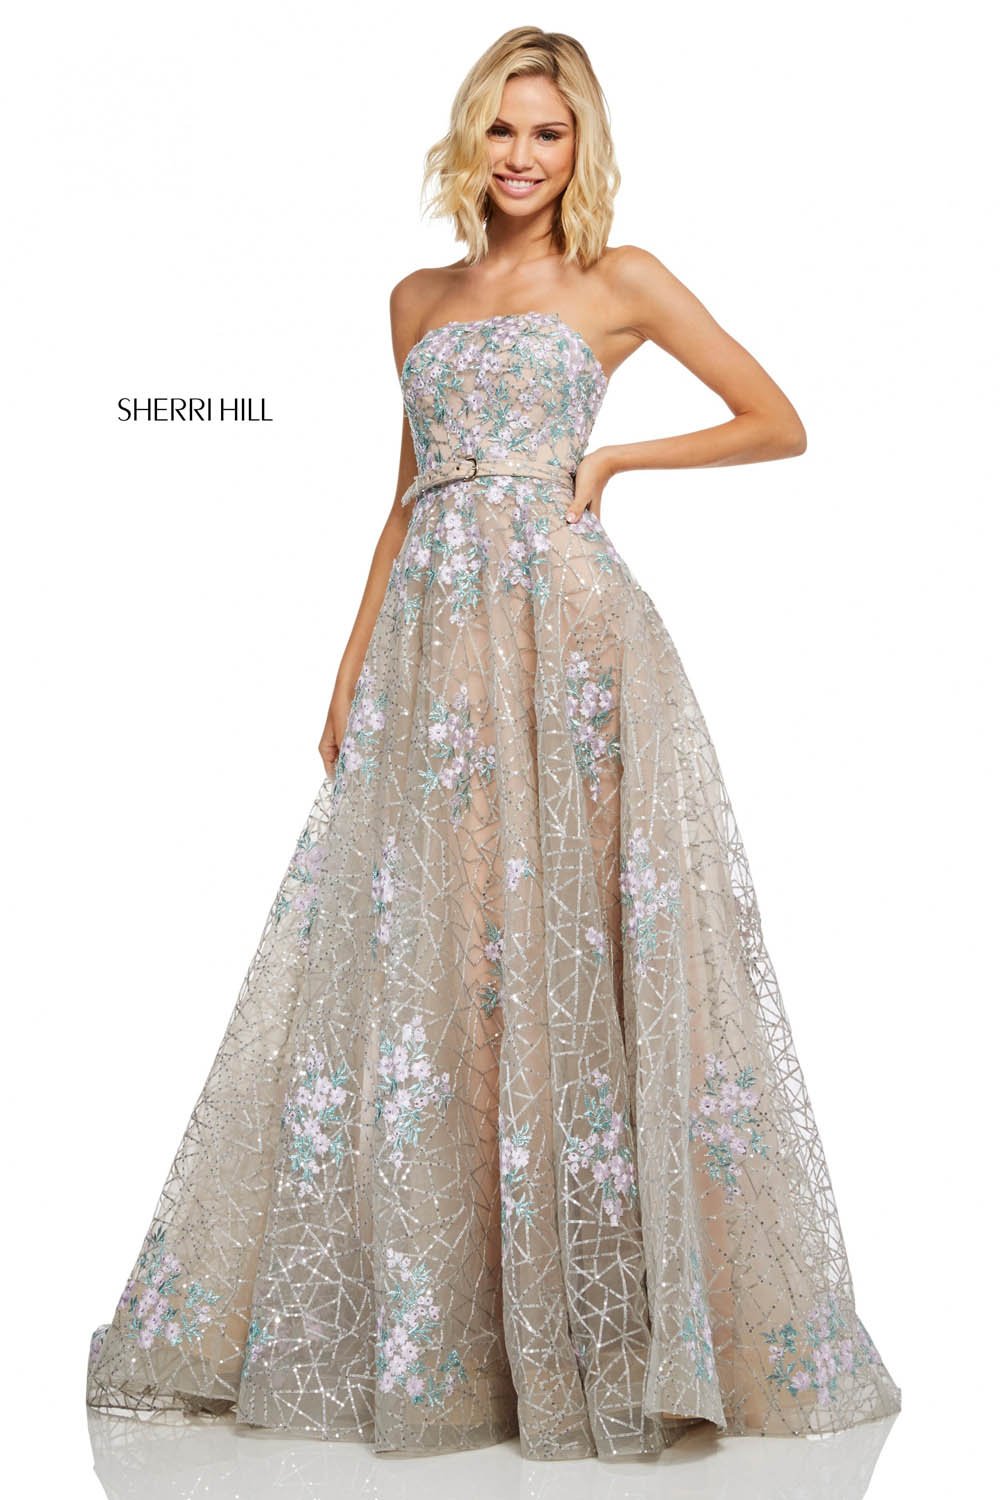 Sherri Hill 52735 dress images in these colors: Silver Lilac.